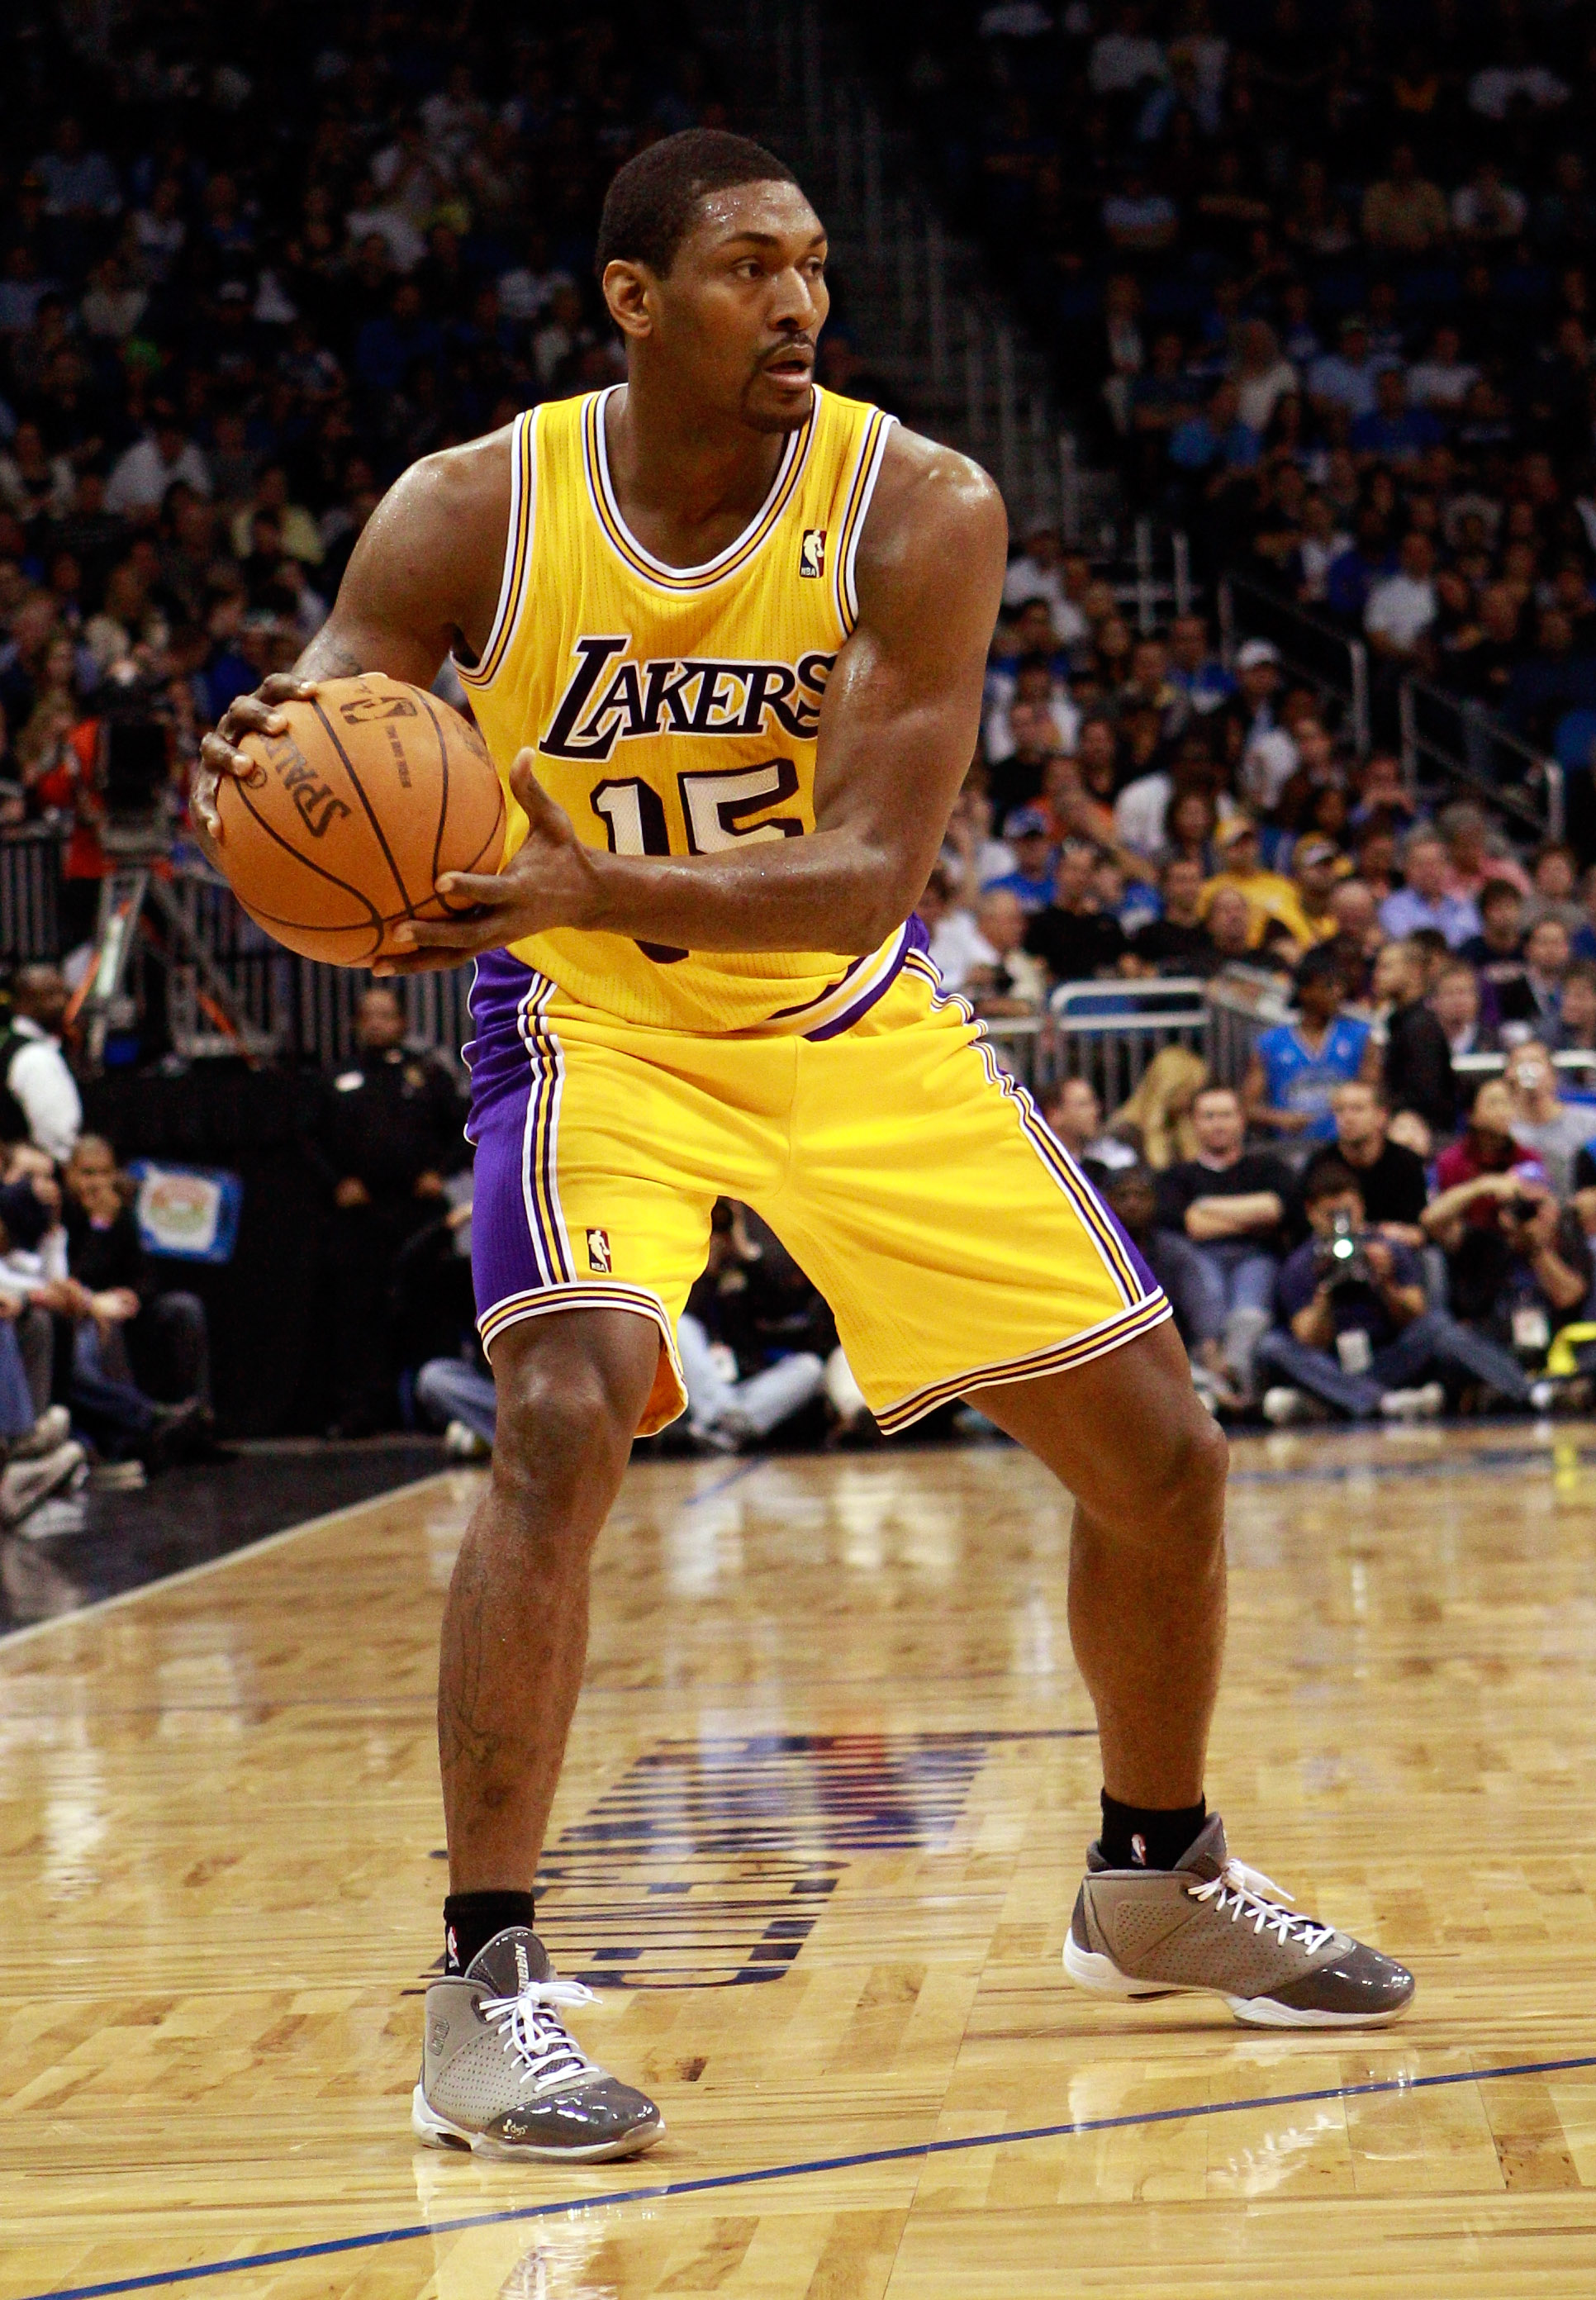 ORLANDO, FL - FEBRUARY 13:  Ron Artest #15 of the Los Angels Lakers looks to pass during the game against the Orlando Magic at Amway Arena on February 13, 2011 in Orlando, Florida.  NOTE TO USER: User expressly acknowledges and agrees that, by downloading